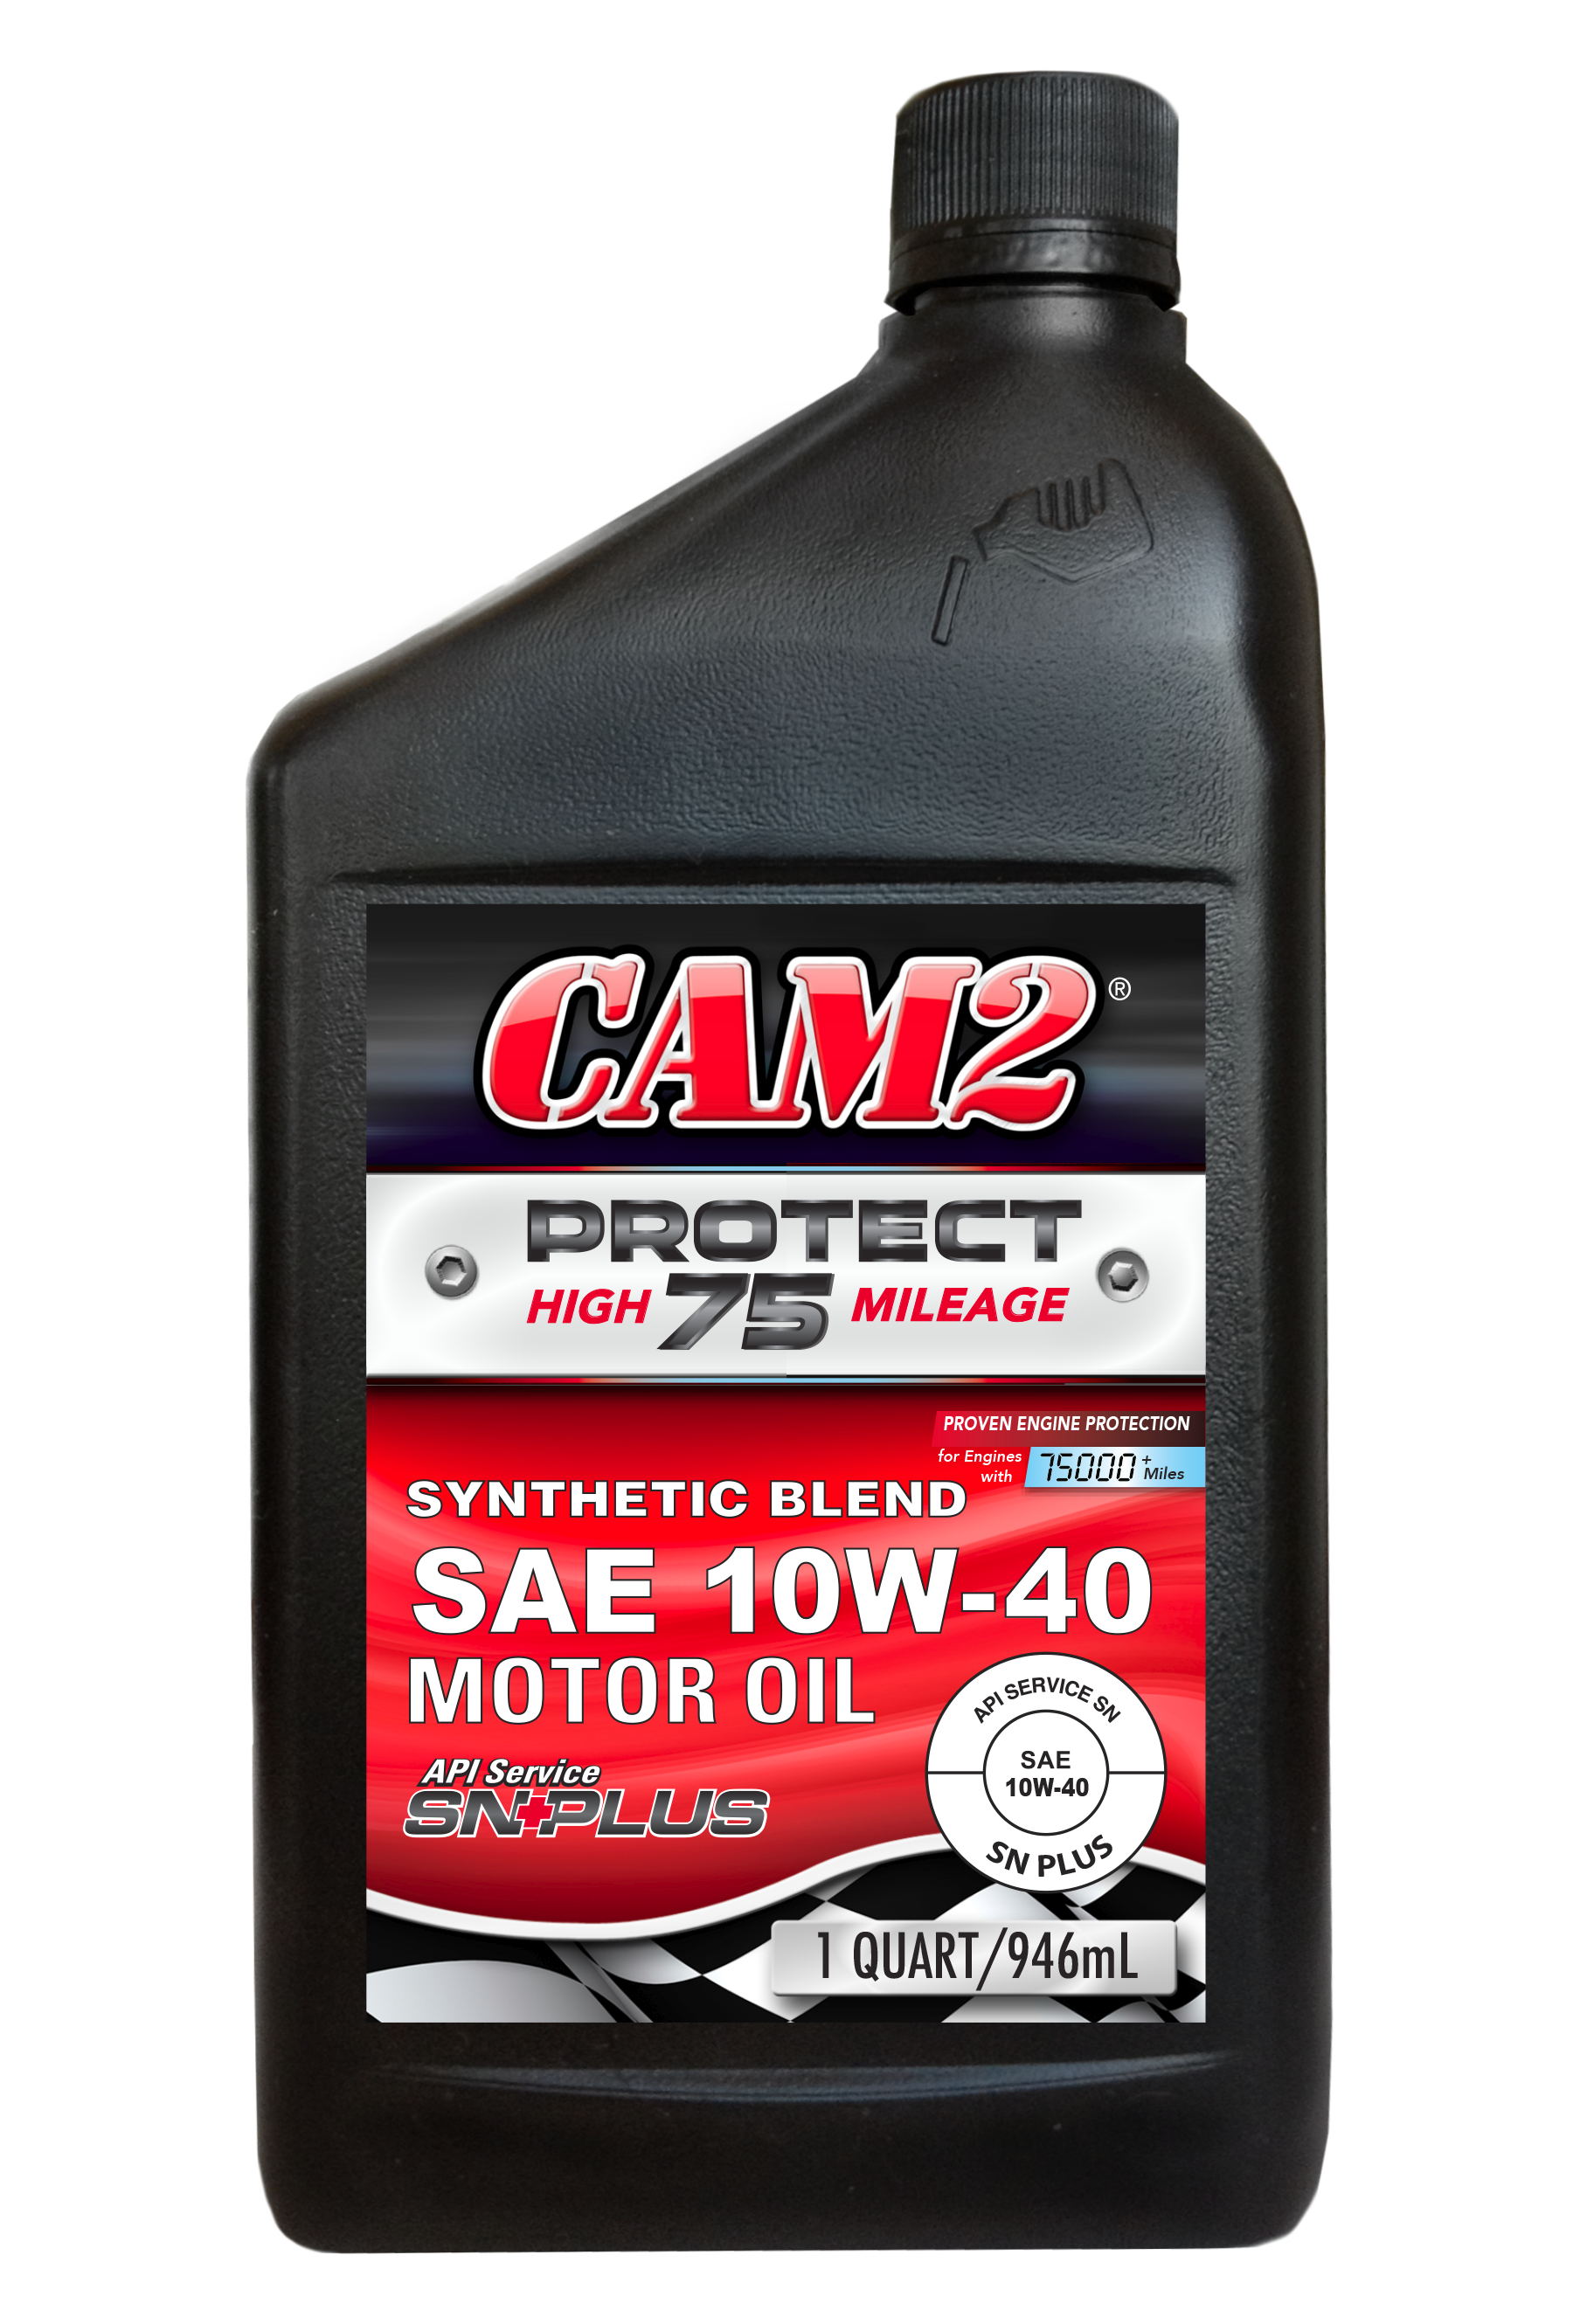 CAM2 PROTECT75 10W-40 SN+ HIGH MILEAGE ENGINE OIL 80565-698